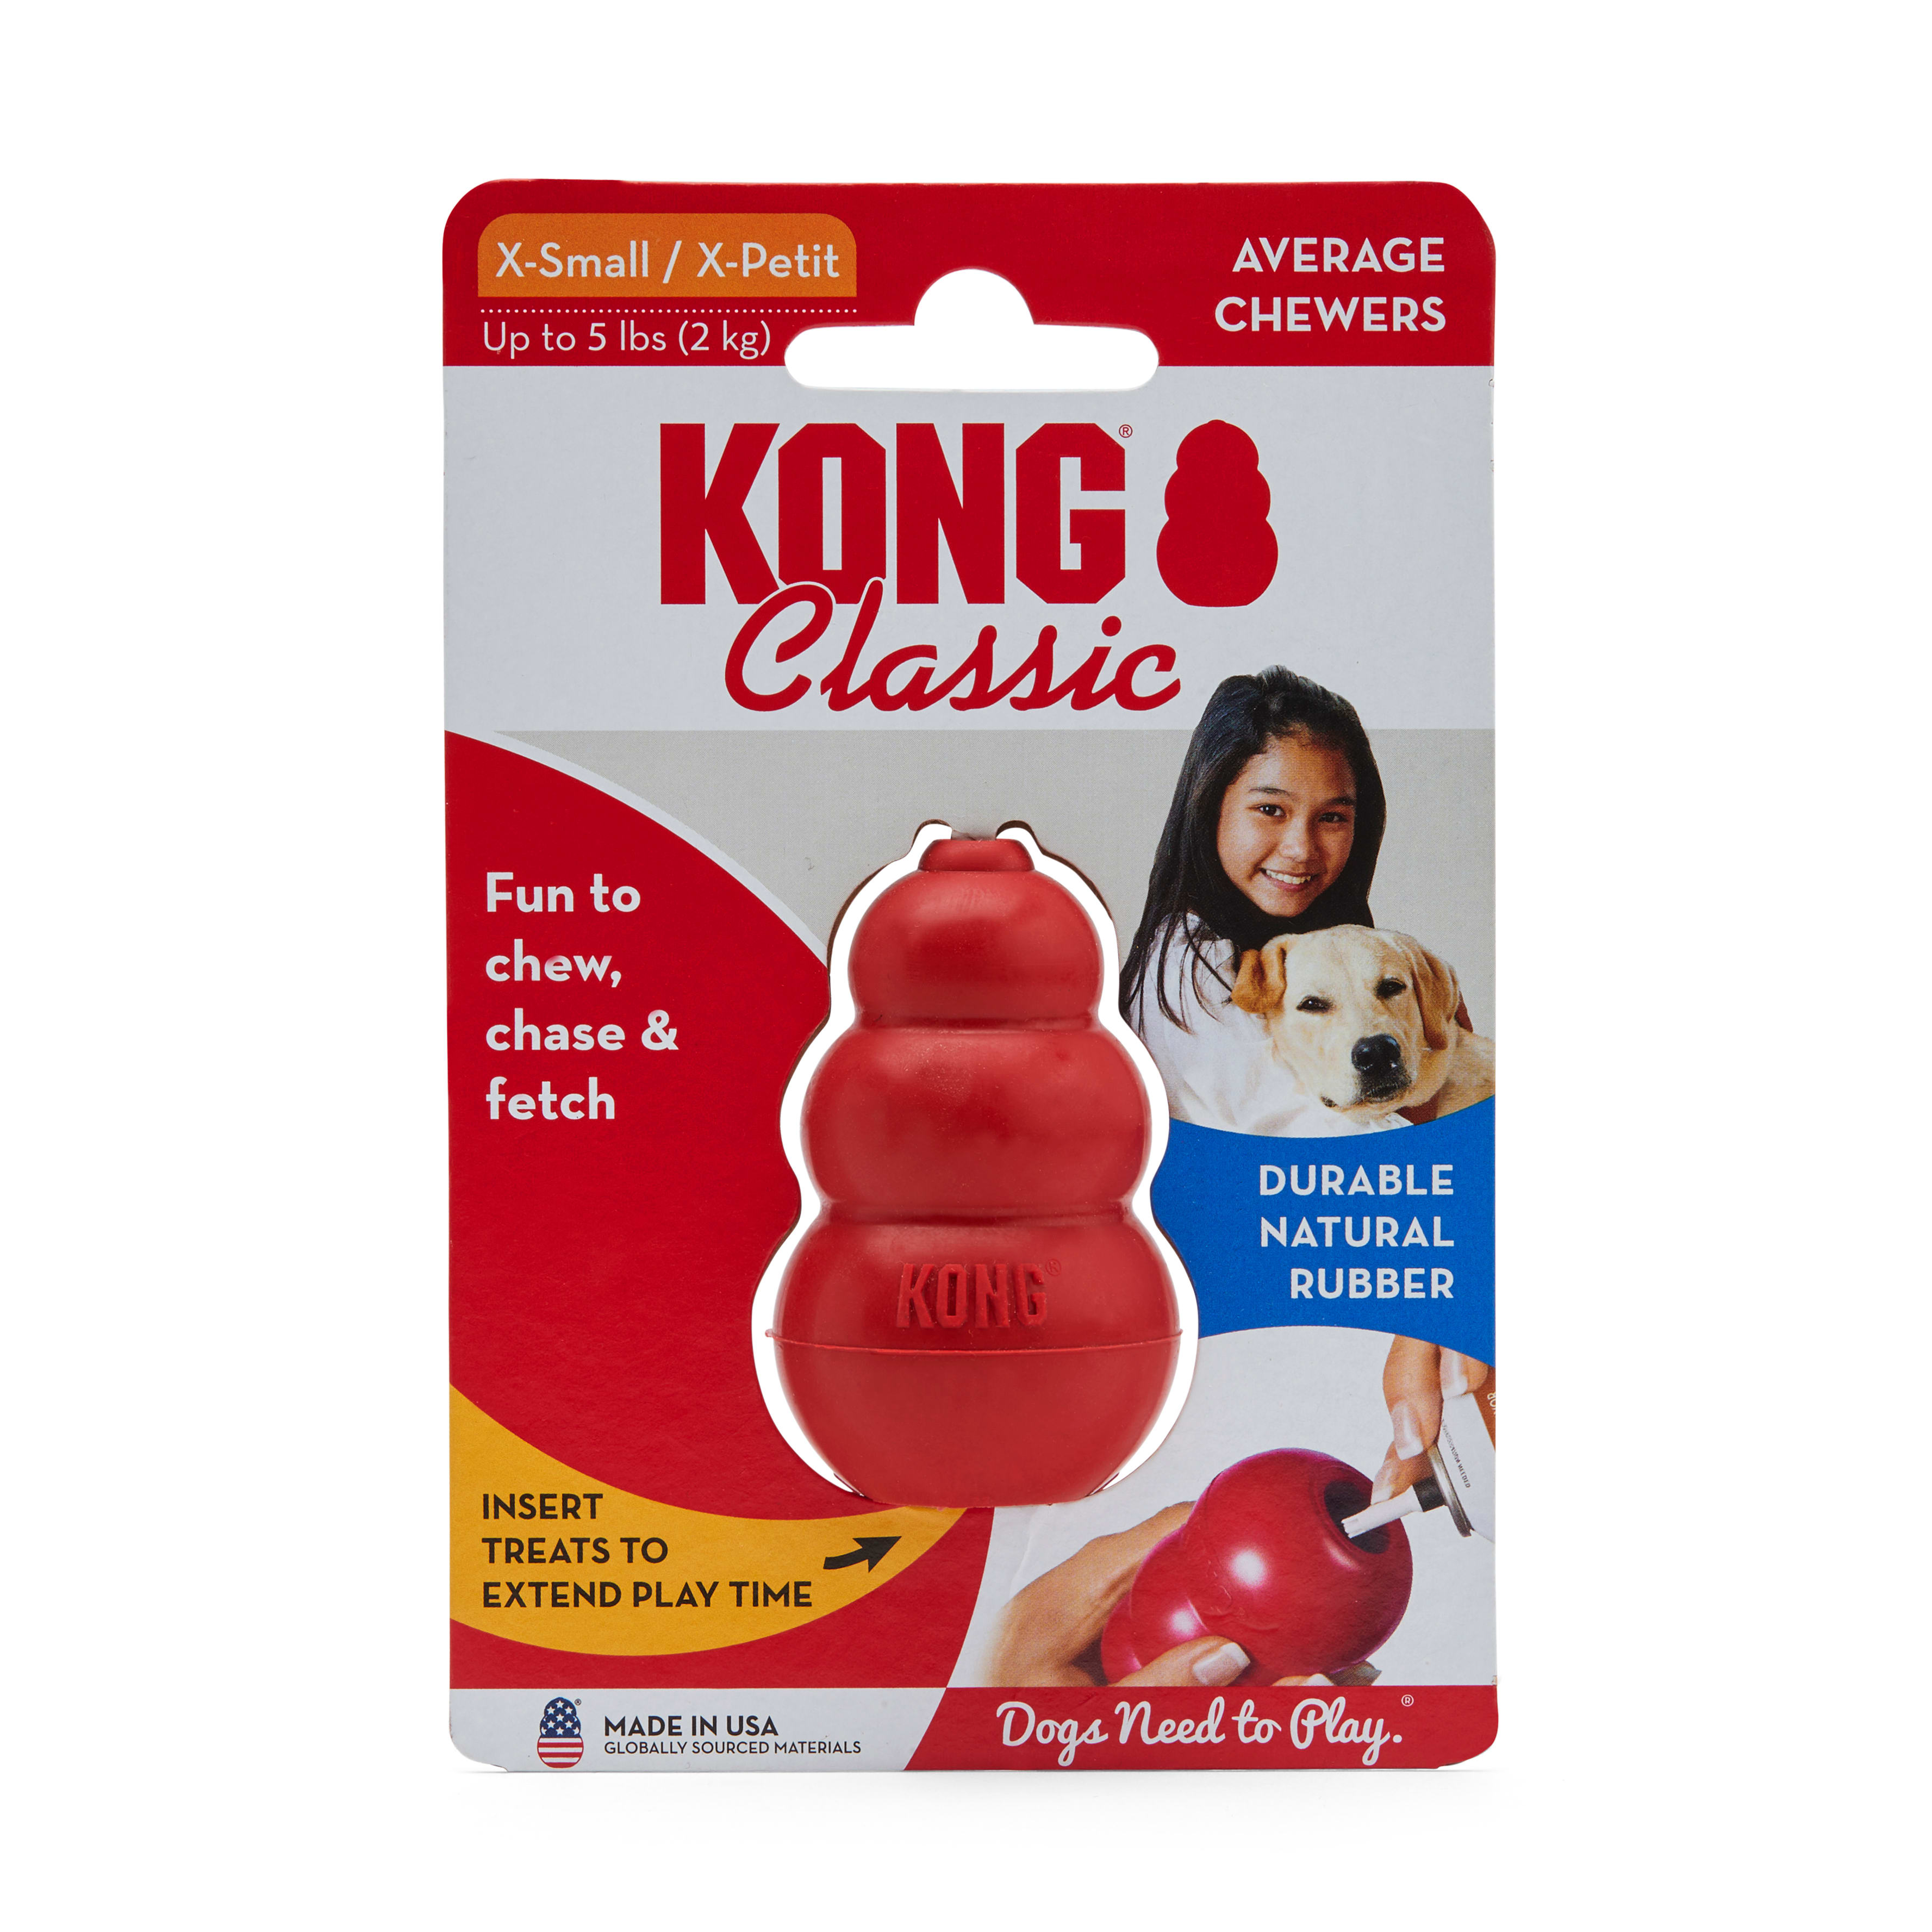 KONG toy